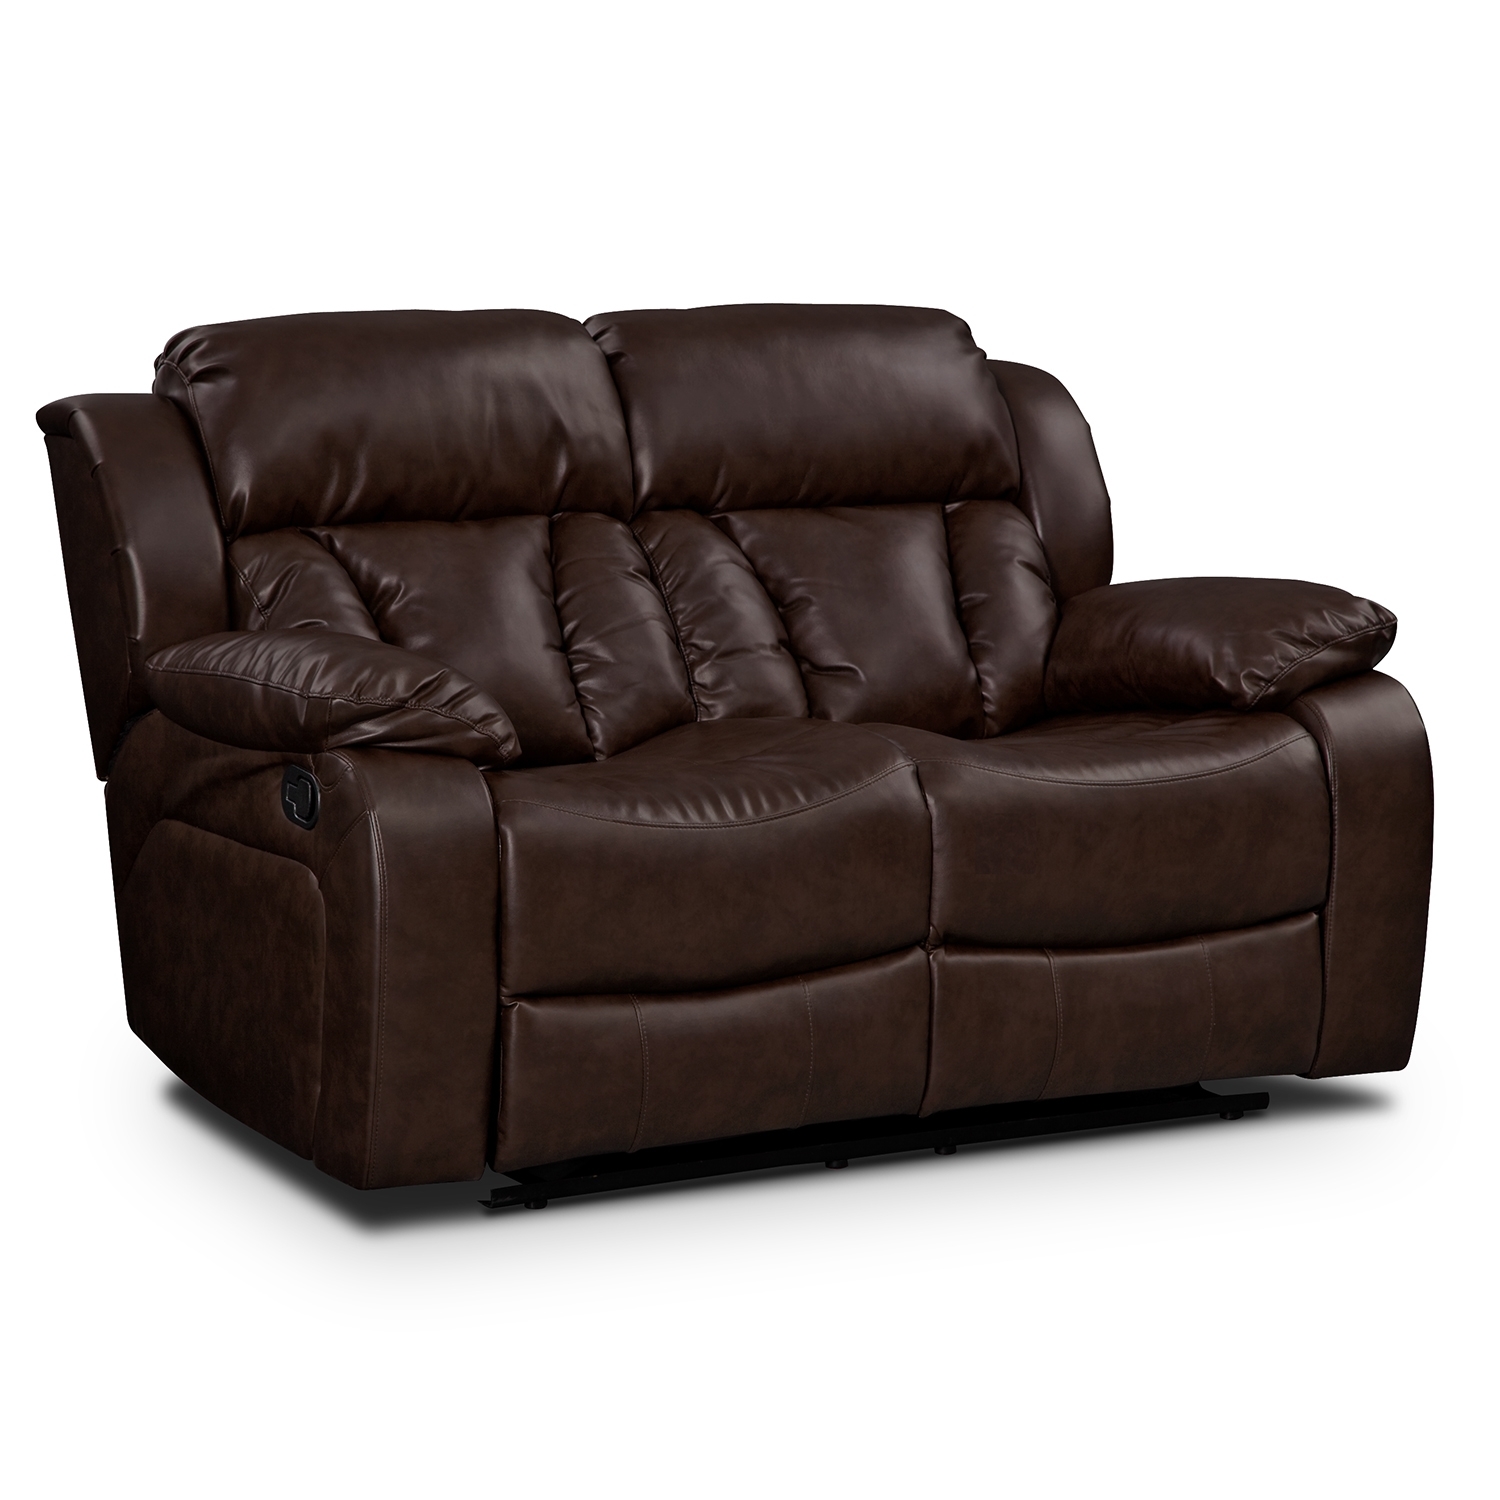 Double wide recliners 2